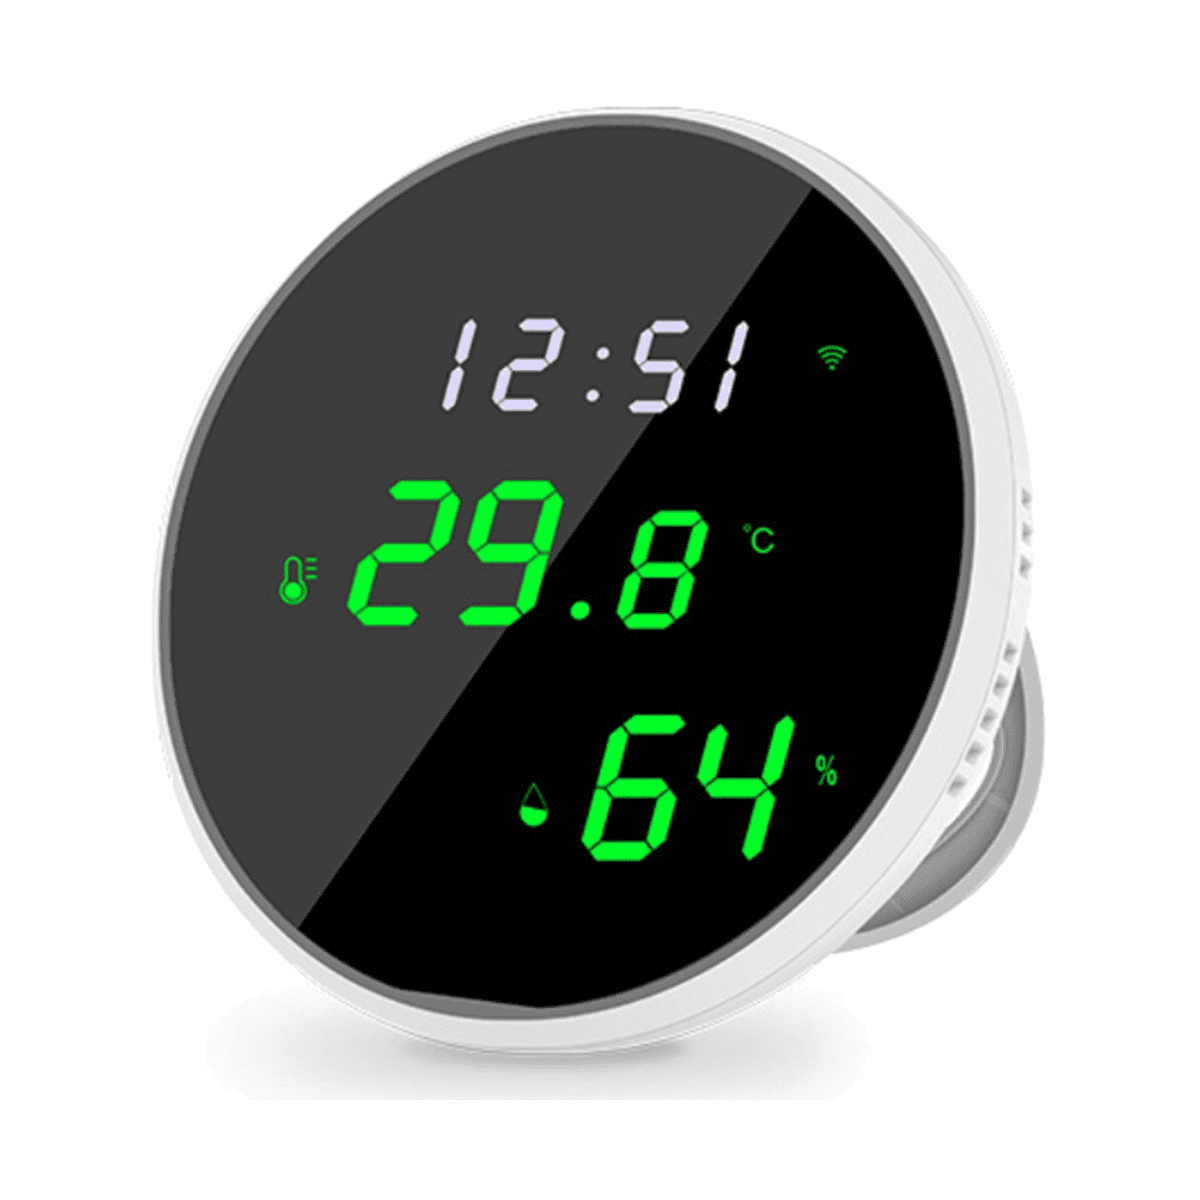 WiFi Thermometer Smart Hygrometer: Indoor Temperature Humidity Sensor with  Backlit Display & App Notification Alerts, Data Storage Export, Calibrated